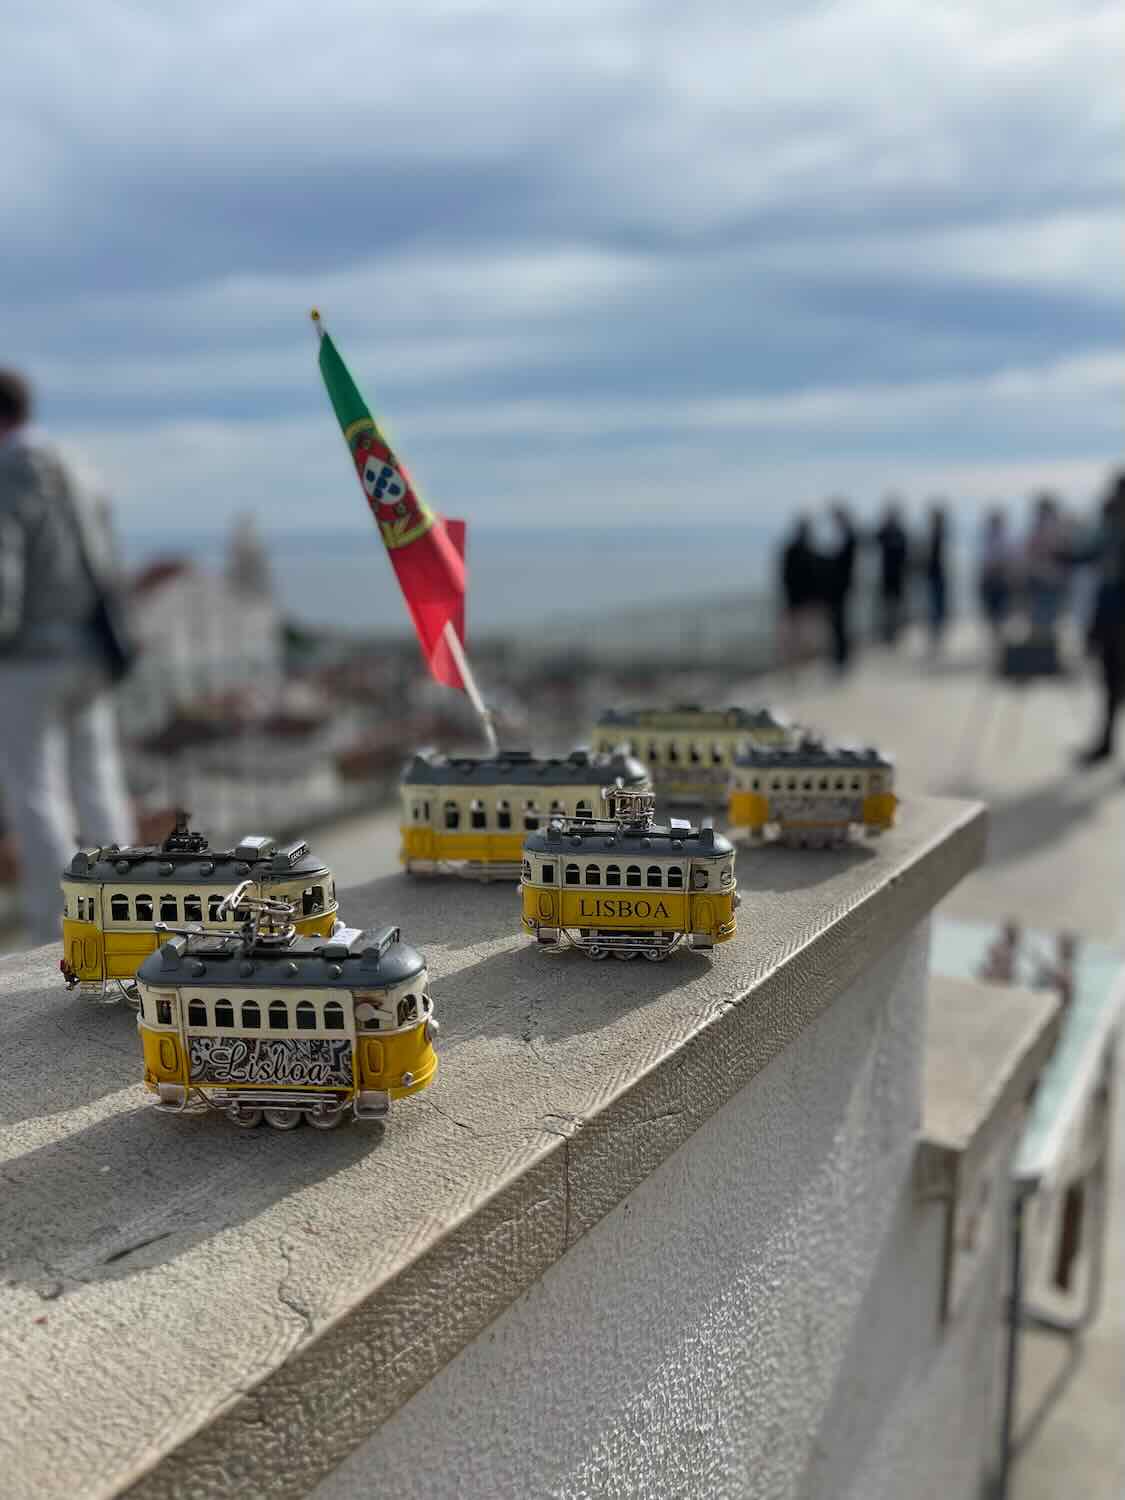 Miniature yellow trams with 'Lisboa' branding displayed on a ledge against the backdrop of a blurred Portuguese flag, symbolizing Lisbon's iconic transport